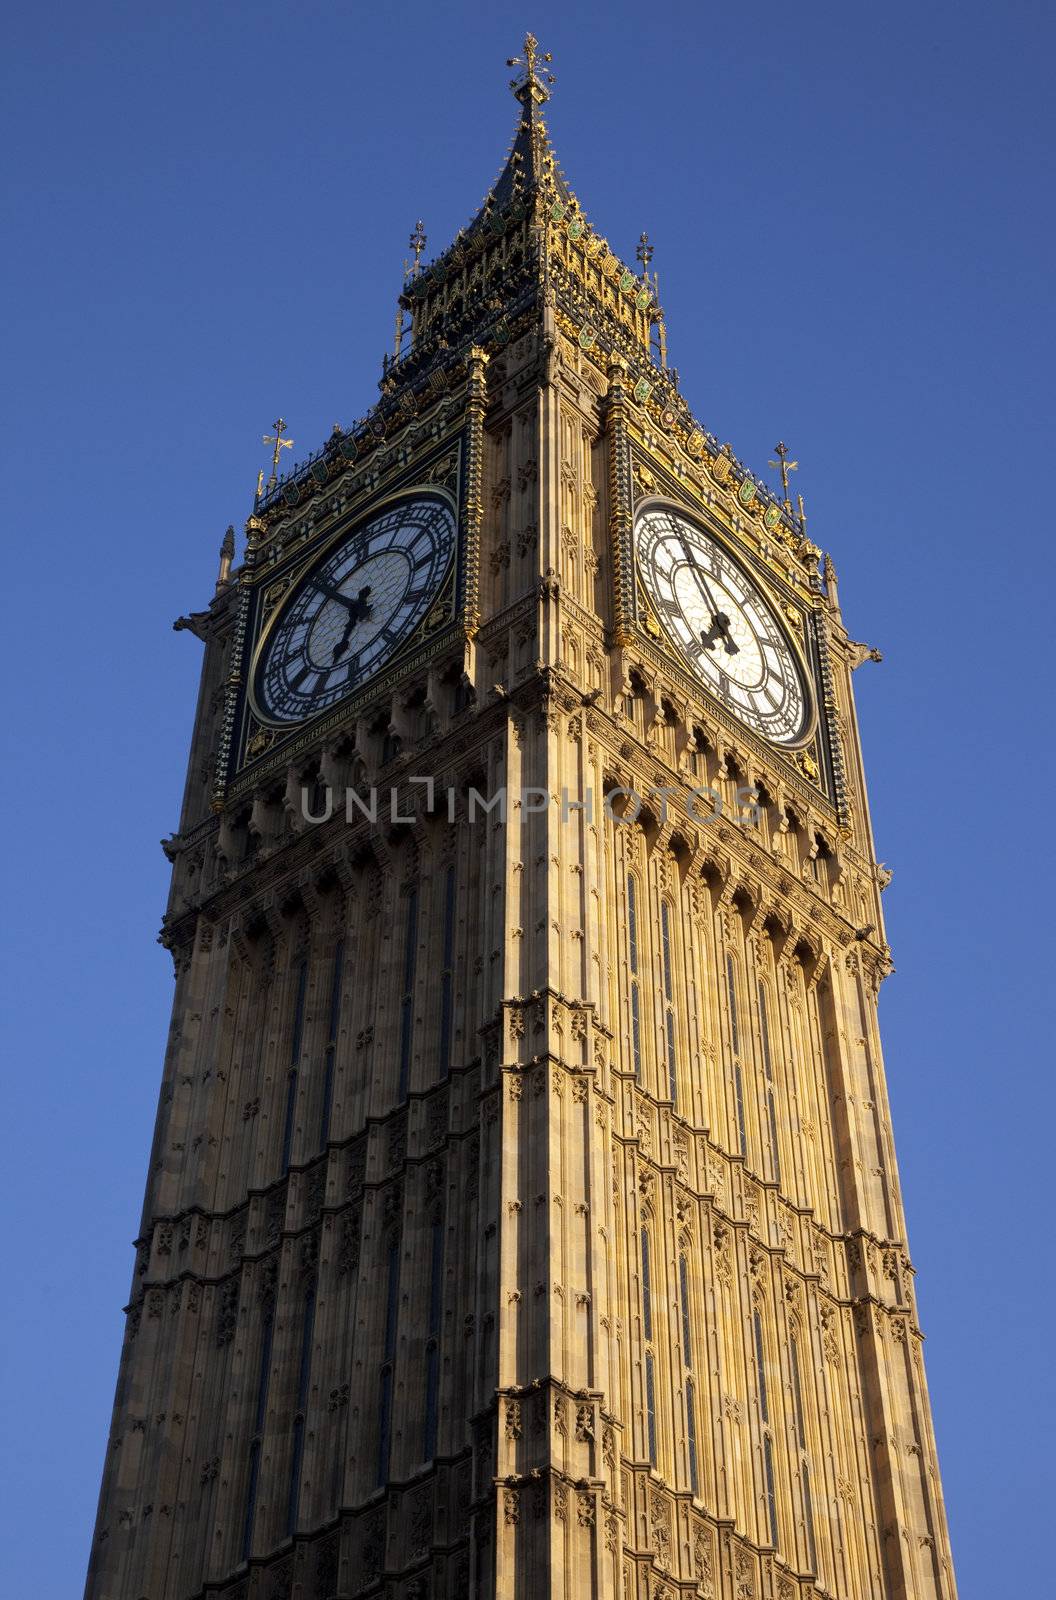 Looking up at Big Ben in London.